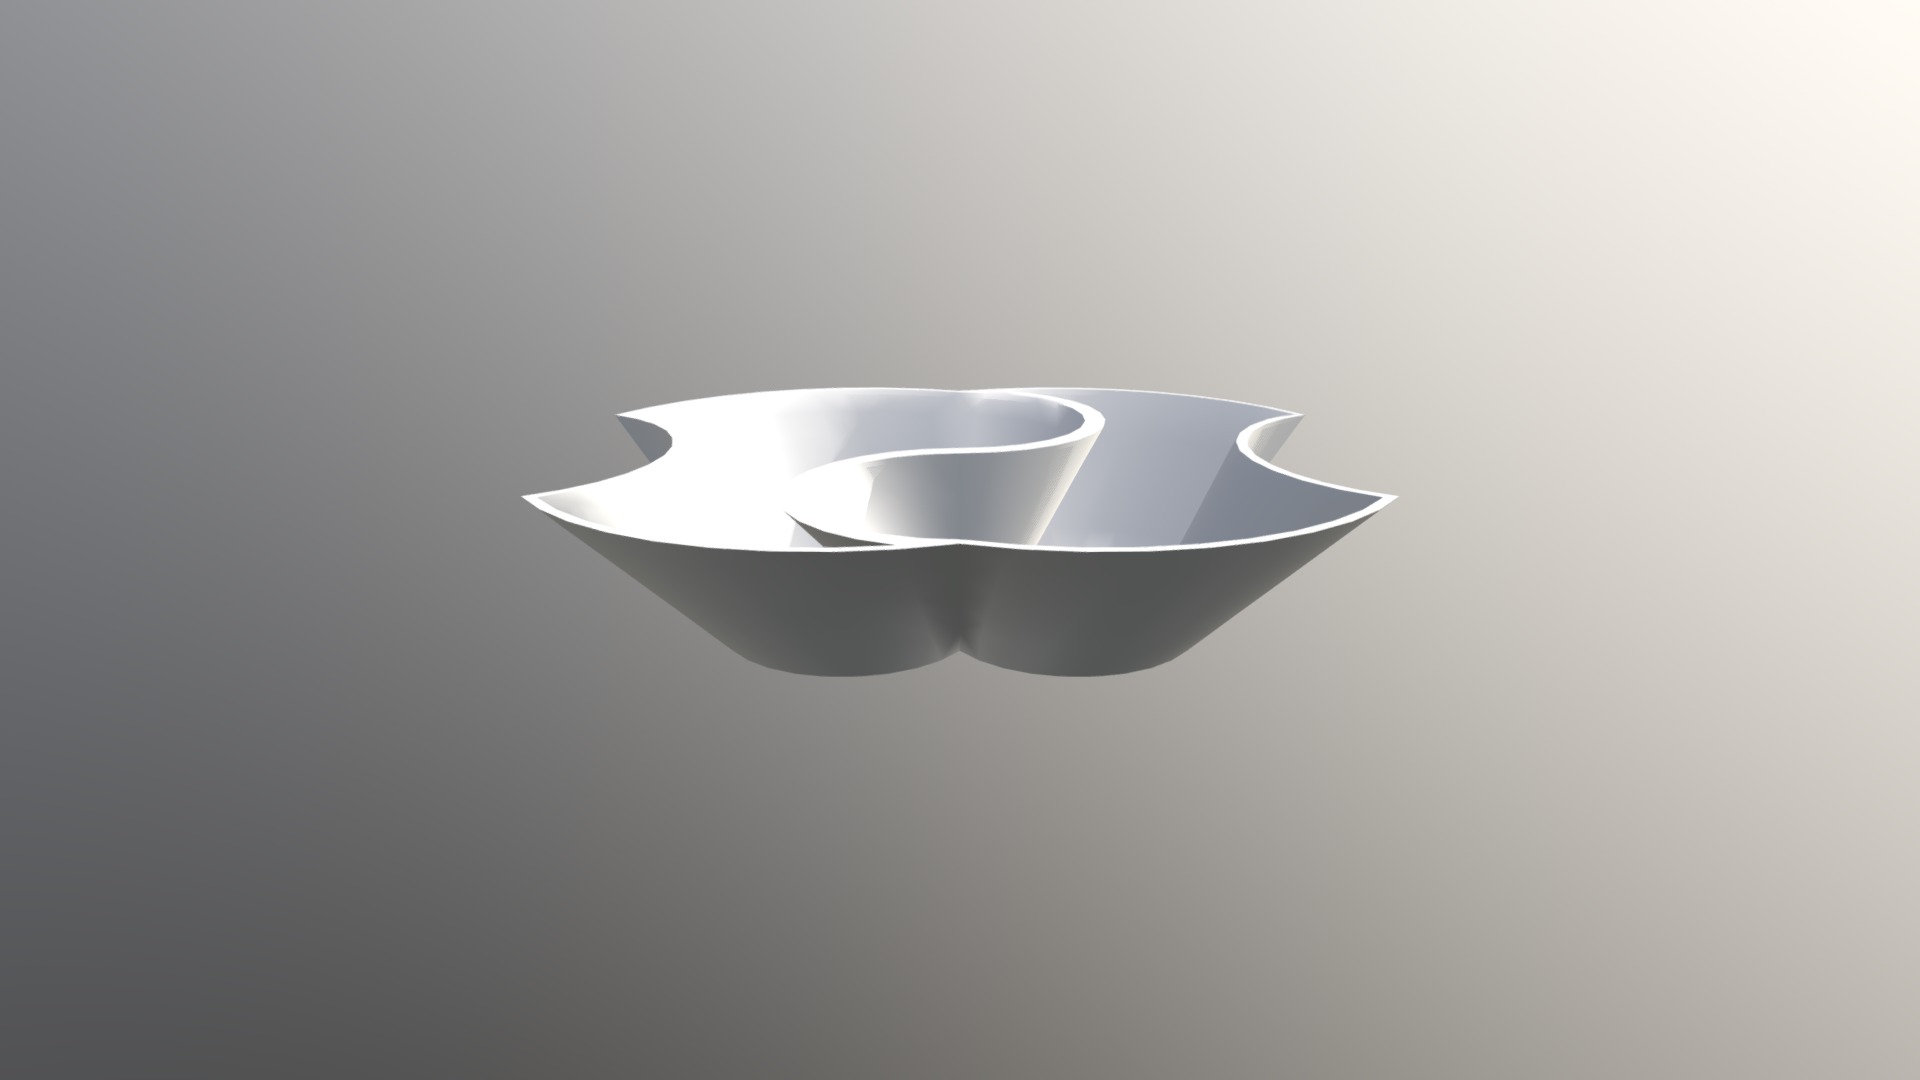 3D model shell seperator bowl - This is a 3D model of the shell seperator bowl. The 3D model is about a white bowl on a white surface.